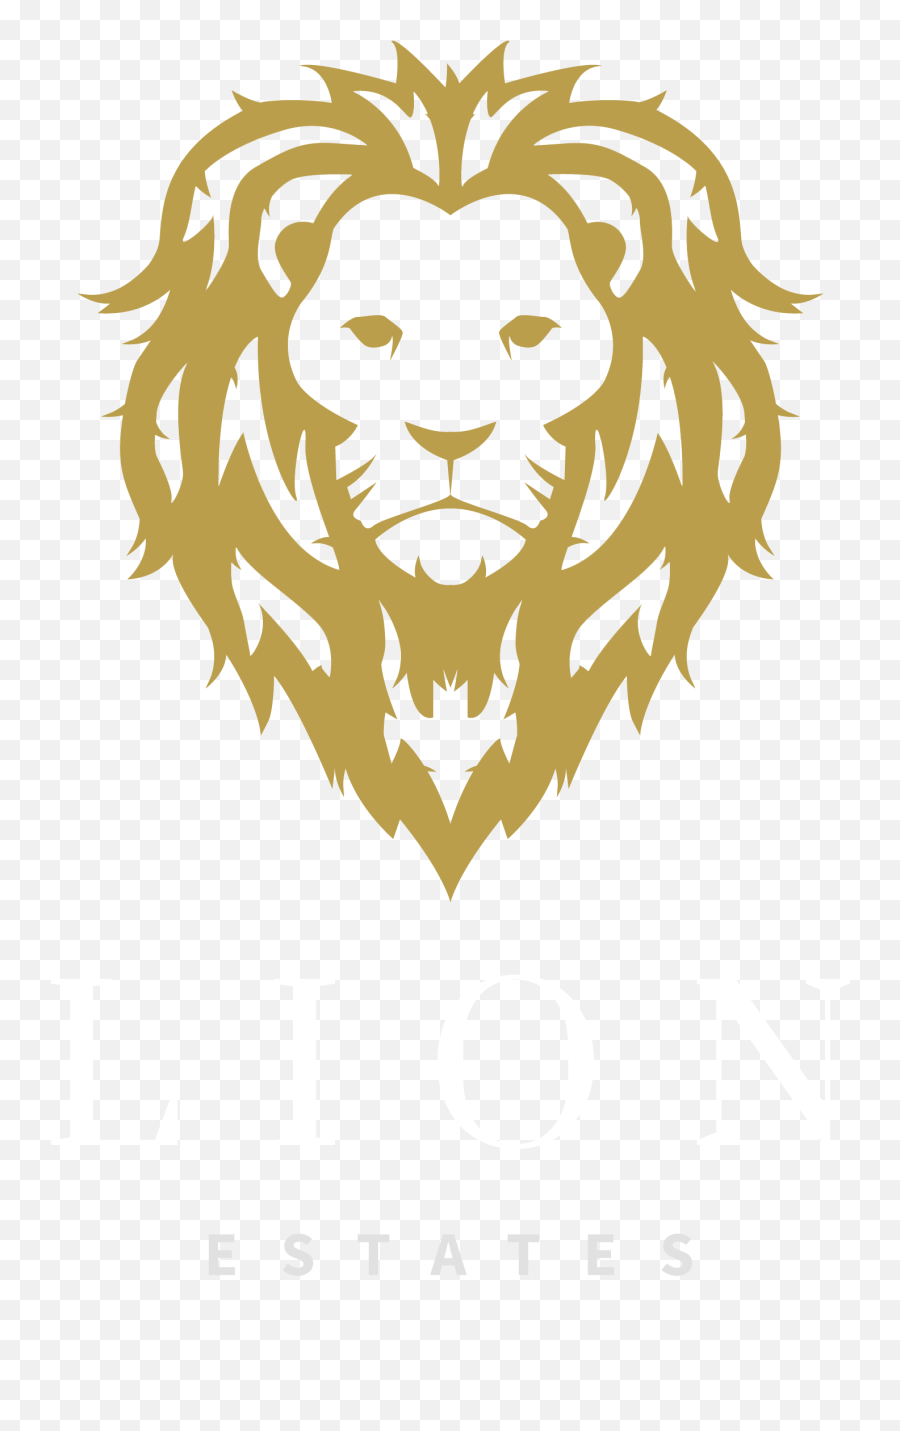 Truly Personal Estate Agents - Animated Lion Face Emoji,Lion Logo